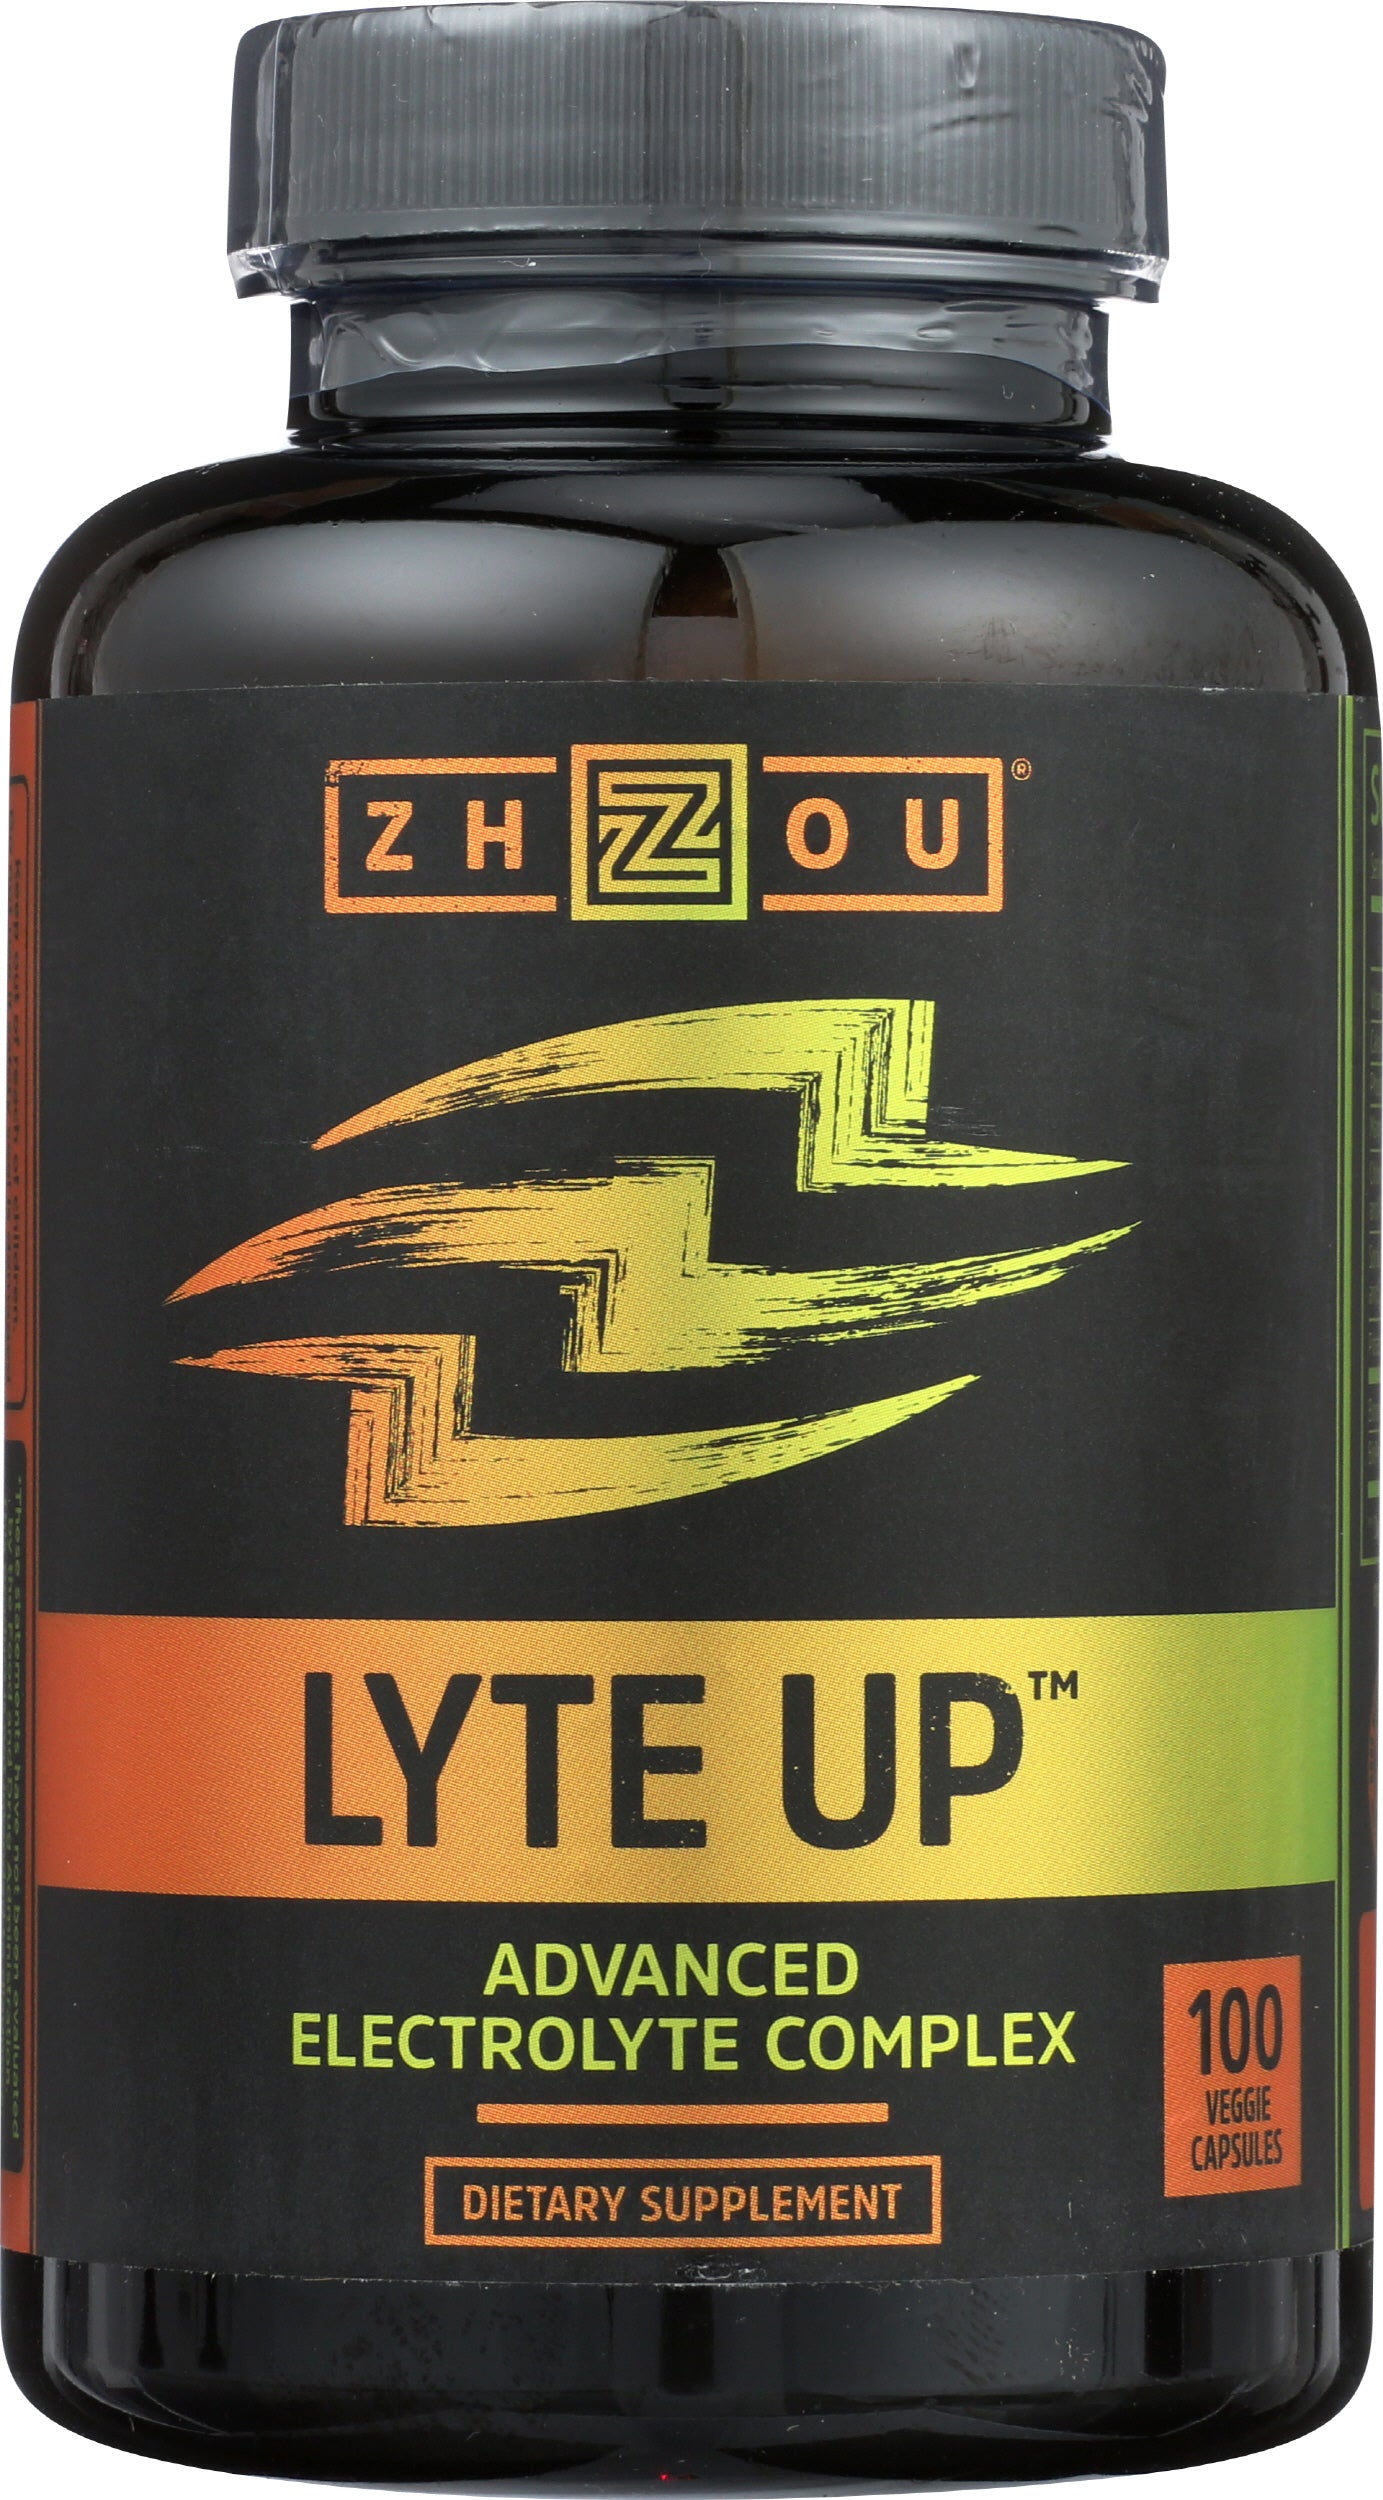 Zhou Lyte Up Advanced Electrolyte Complex 100 Veggie Capsules Front of Bottle